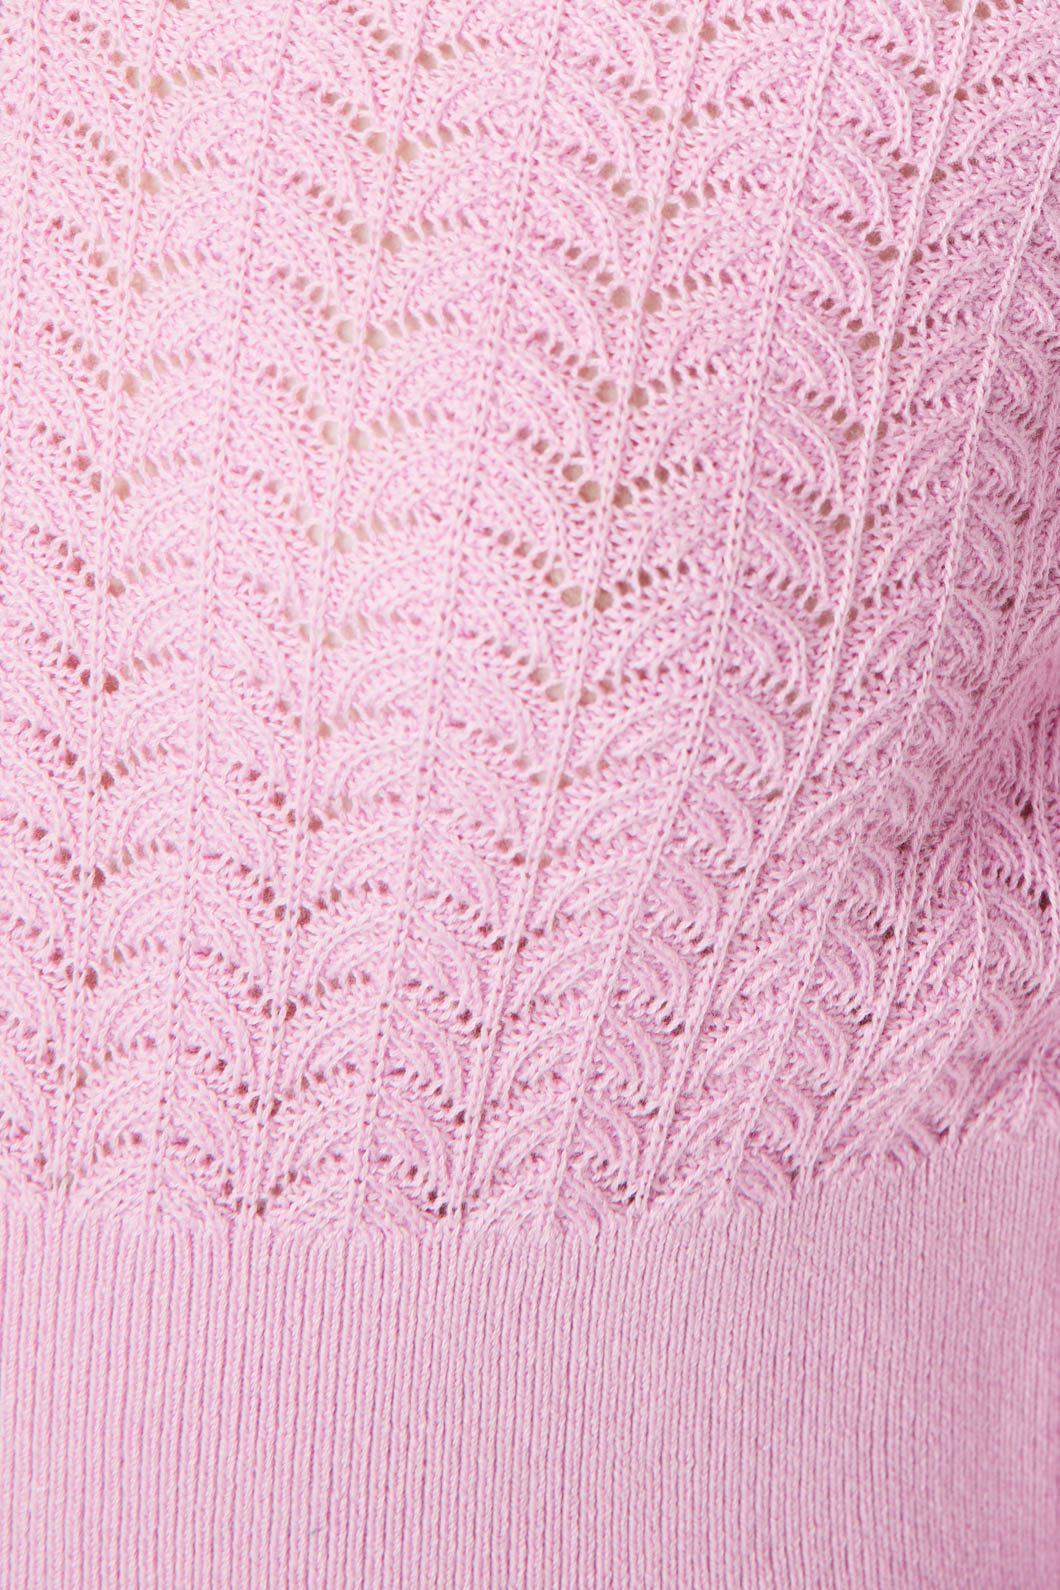 Rosy Knitwear: Embracing the Country Roads